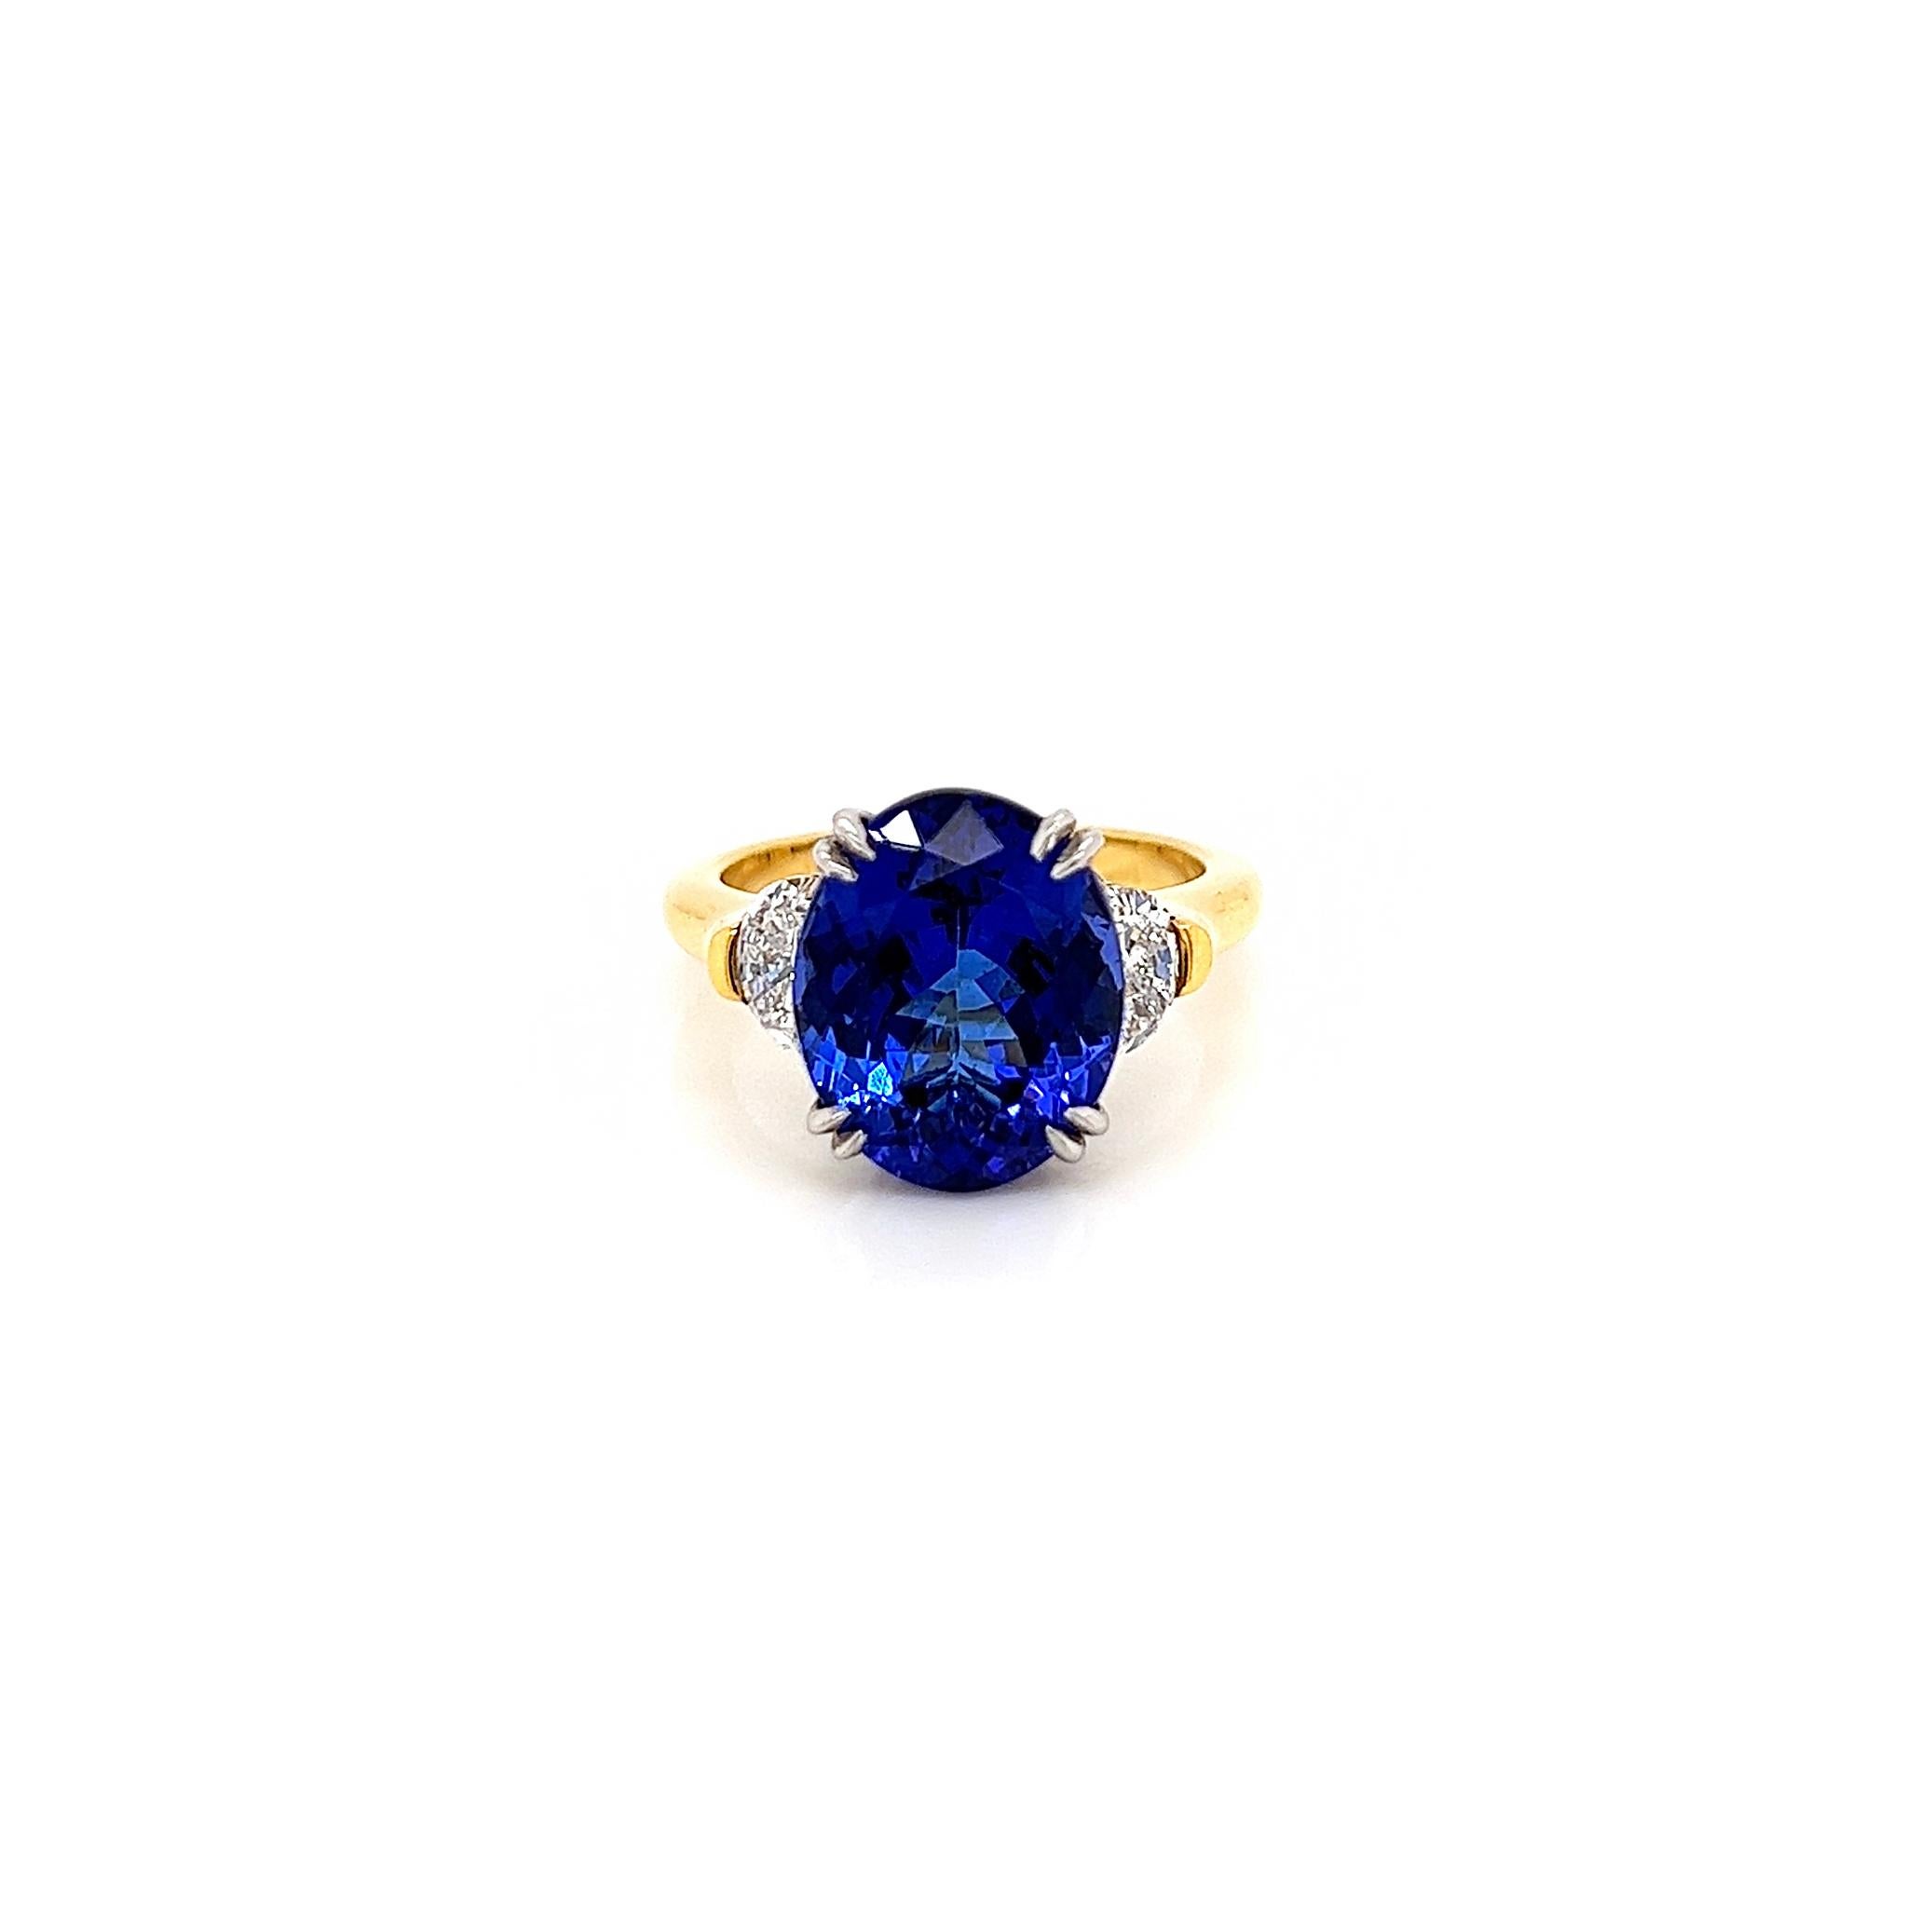 7.41 Total Carat Tanzanite and Diamond Three Stone Ladies Ring

-Metal Type: 18K Two-Tone Gold
-6.57 Carat Oval Cut Natural AAA Quality Tanzanite 
-0.84 Carat Half-moon Cut Natural side Diamonds. F-G Color, VS1-VS2 Clarity 

-Size 6.0

Made in New